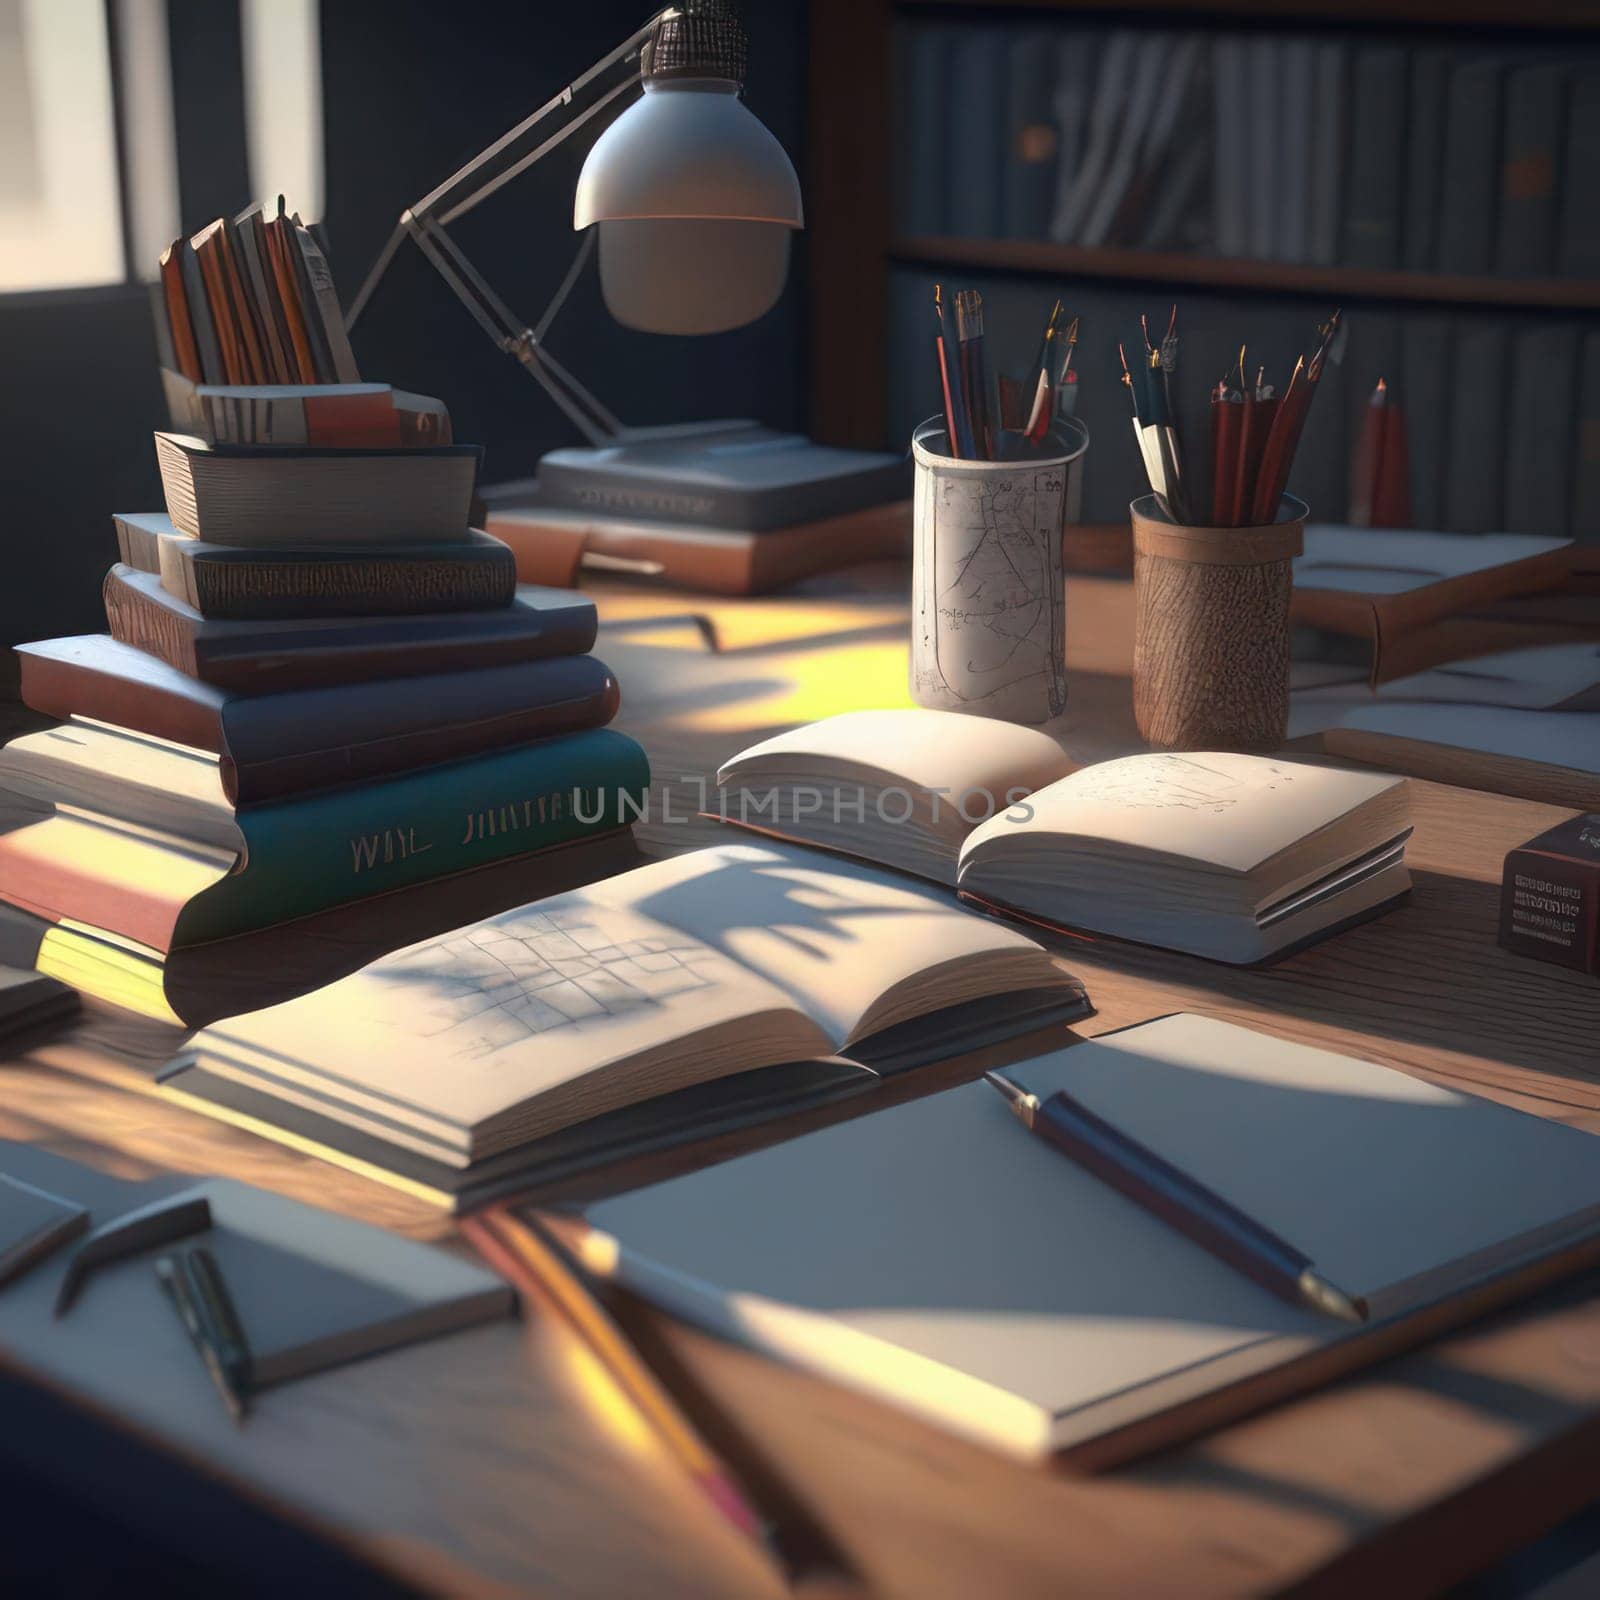 Books on the table. Image created by AI